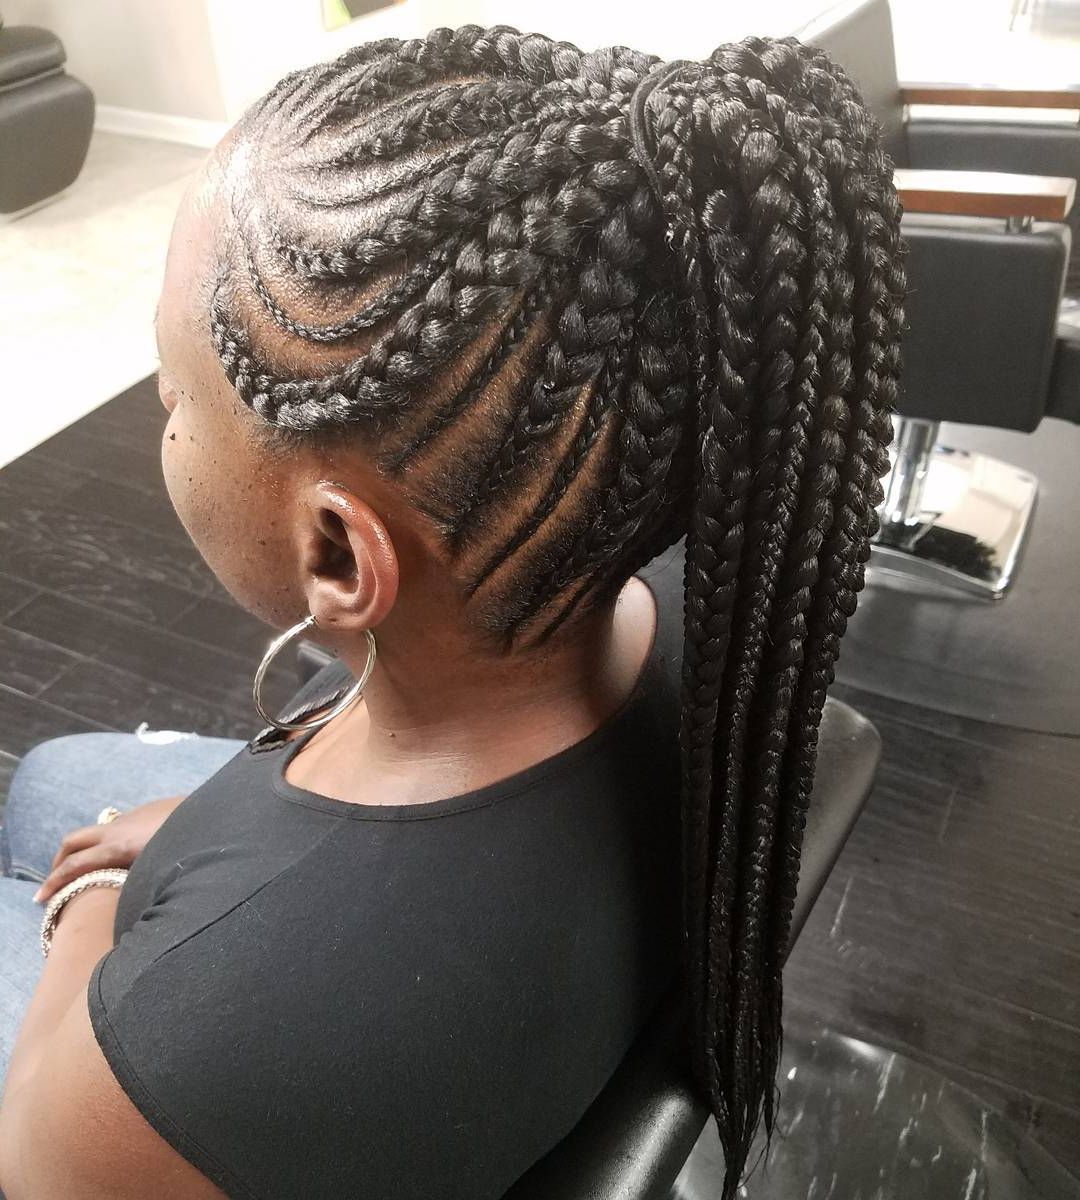 20 Gorgeous Ghana Braids For An Intricate Hairdo In 2019 Inside Famous Blonde Asymmetrical Pigtails Braid Hairstyles (View 11 of 20)